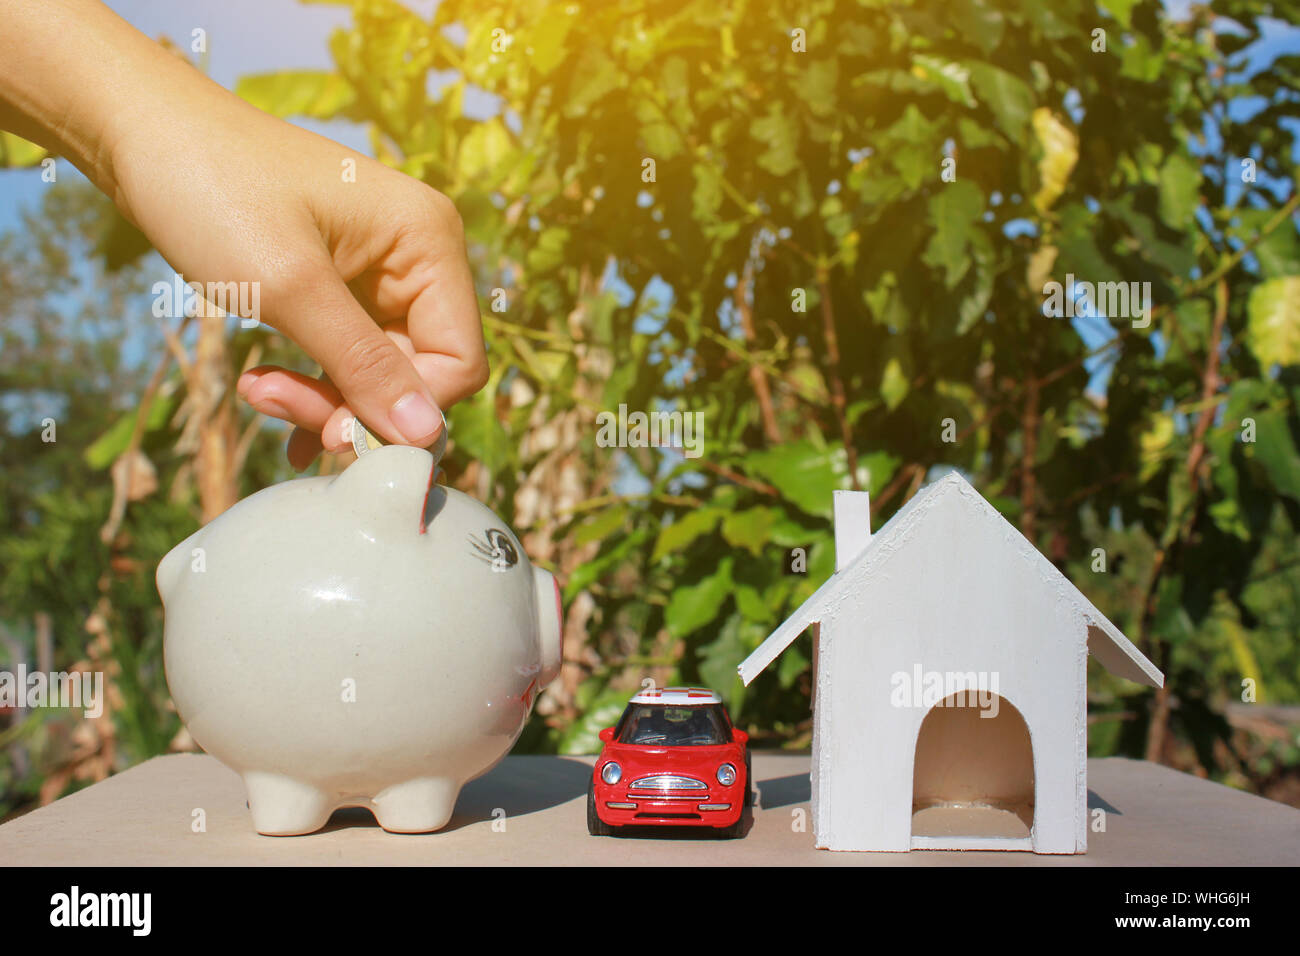 Cropped Image Of Hand Putting Coin In Piggy Bank Representing Home Ownership Stock Photo